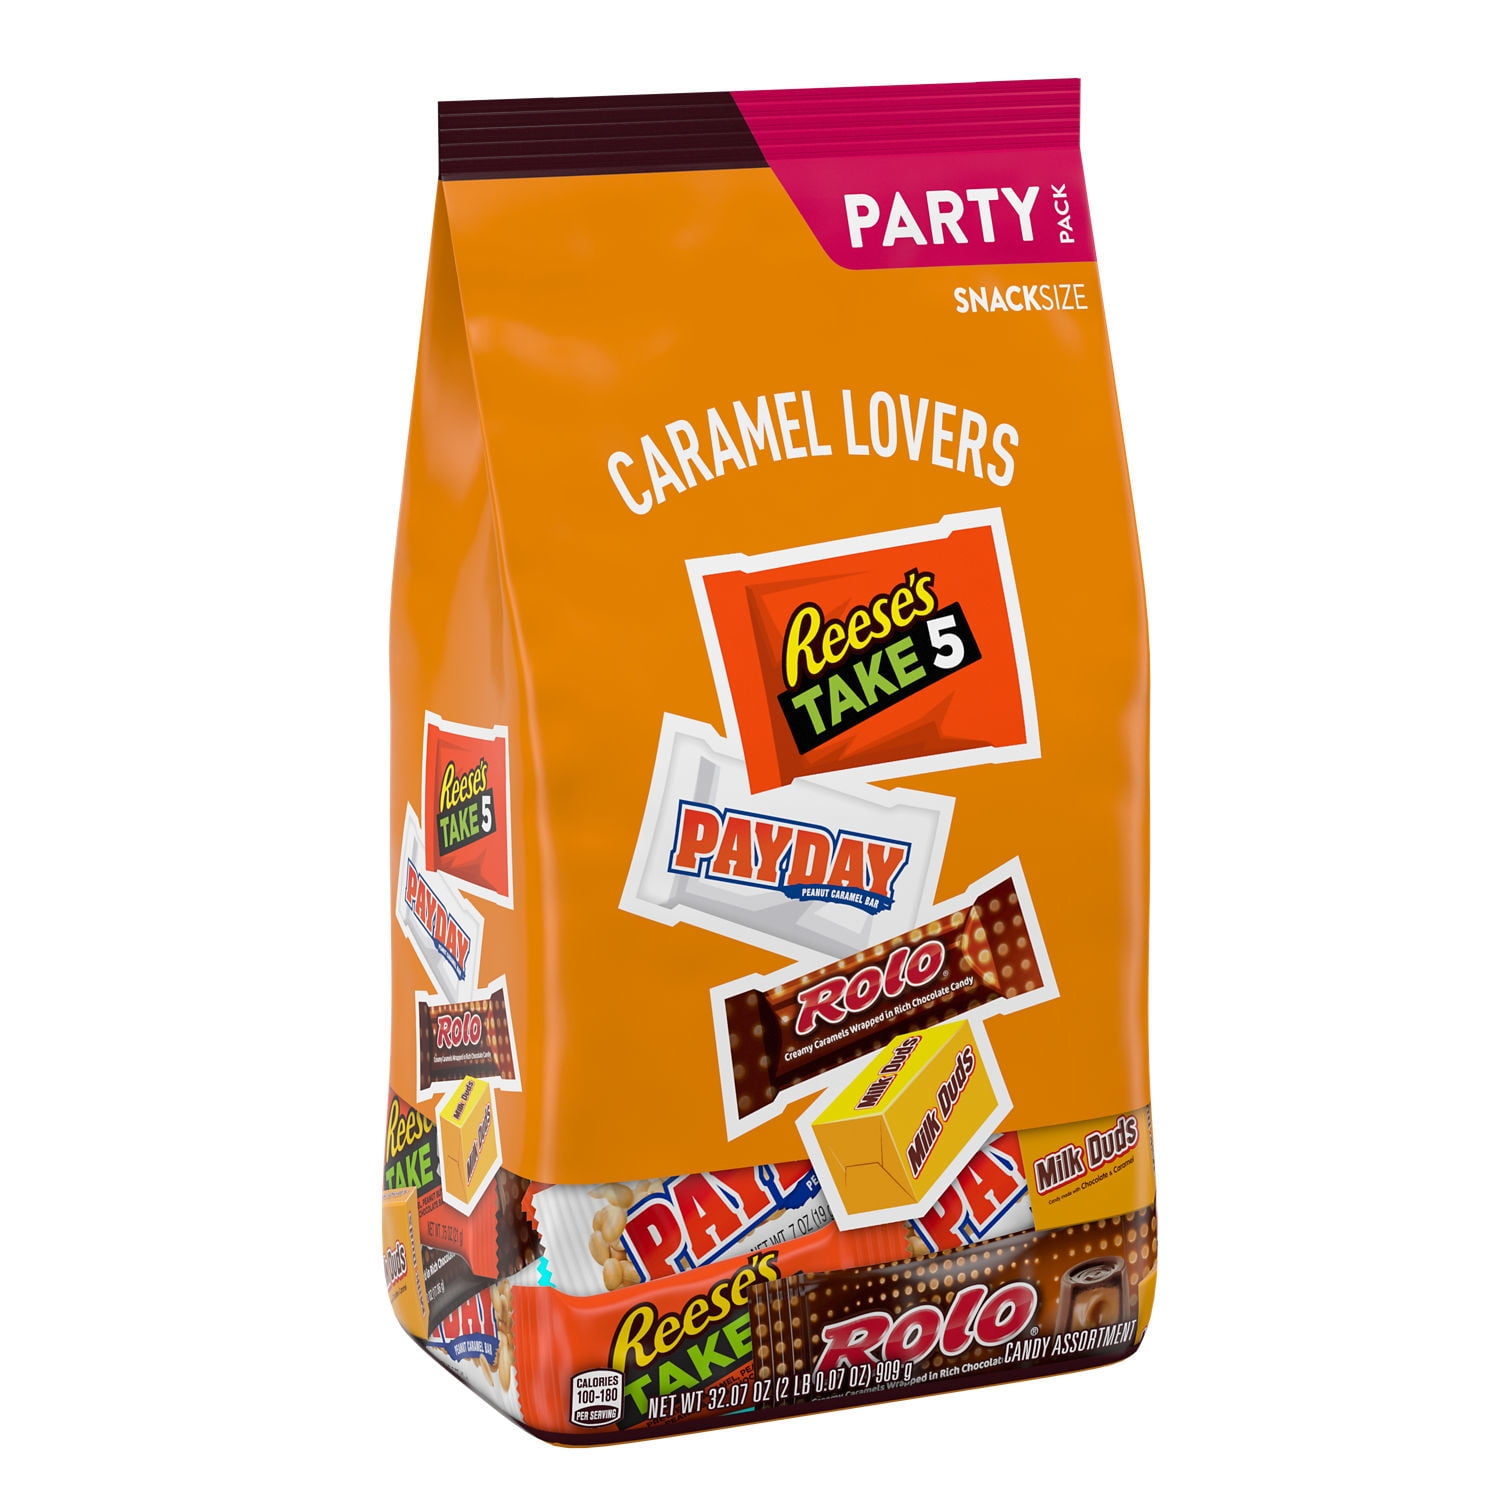 Hershey Caramel Lovers Caramel Assortment Snack Size, Individually Wrapped Candy Bulk Party Pack, 32.07 oz